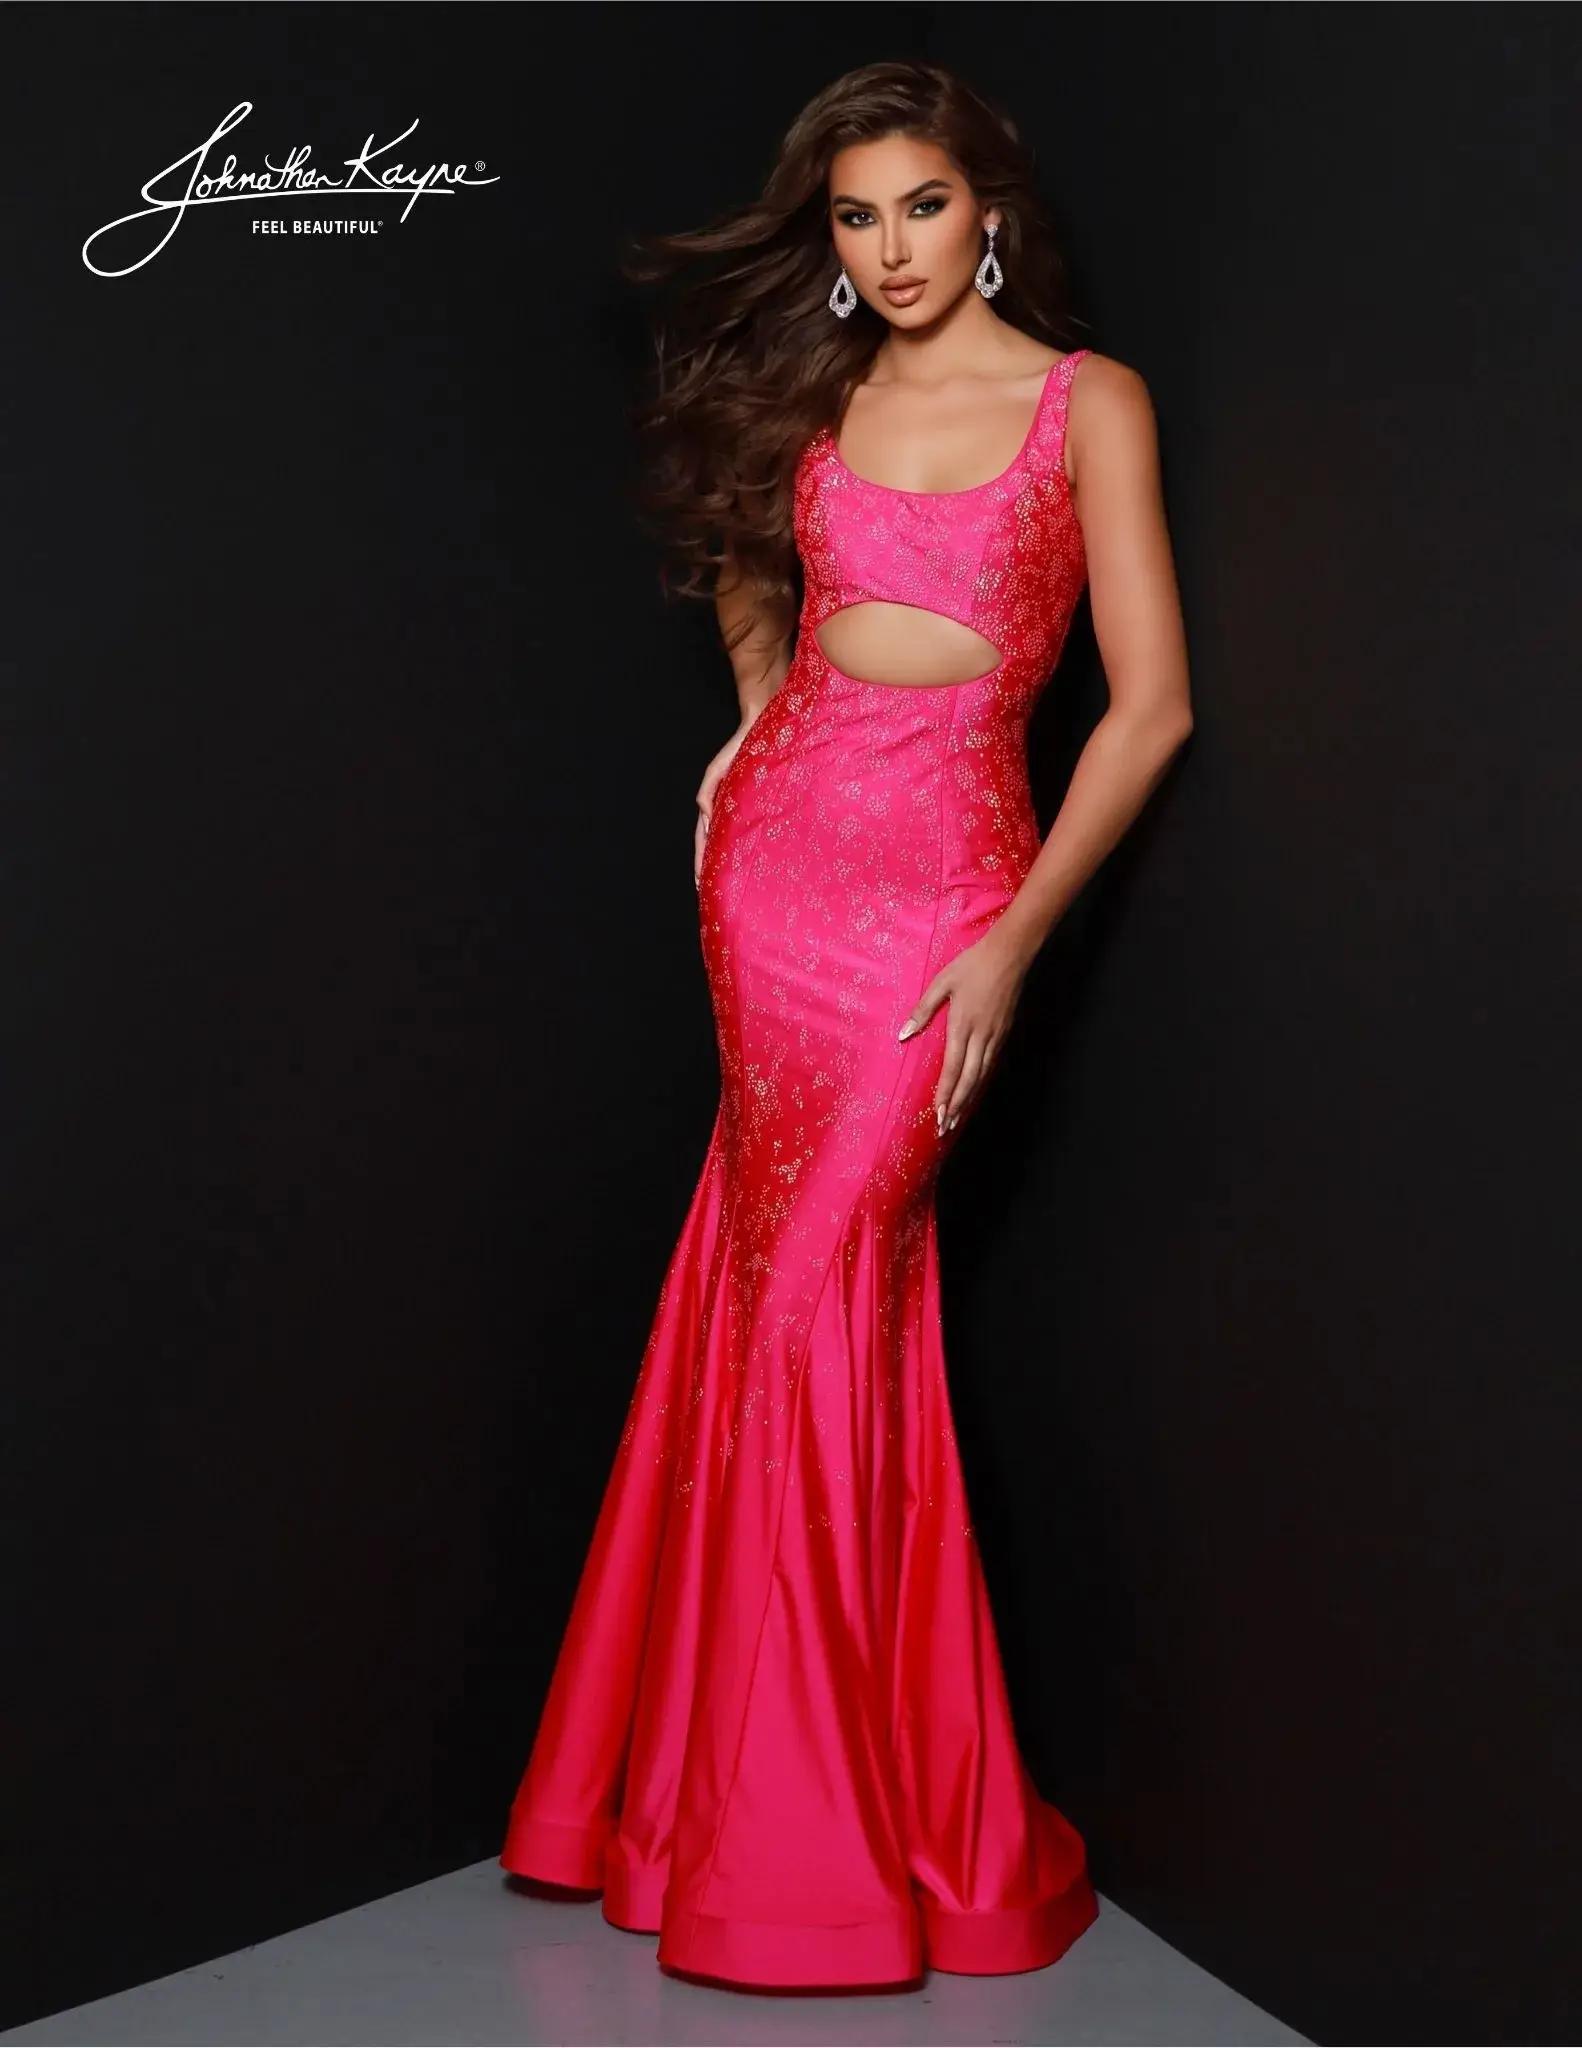 Photo of model wearing one of BQG featured gowns